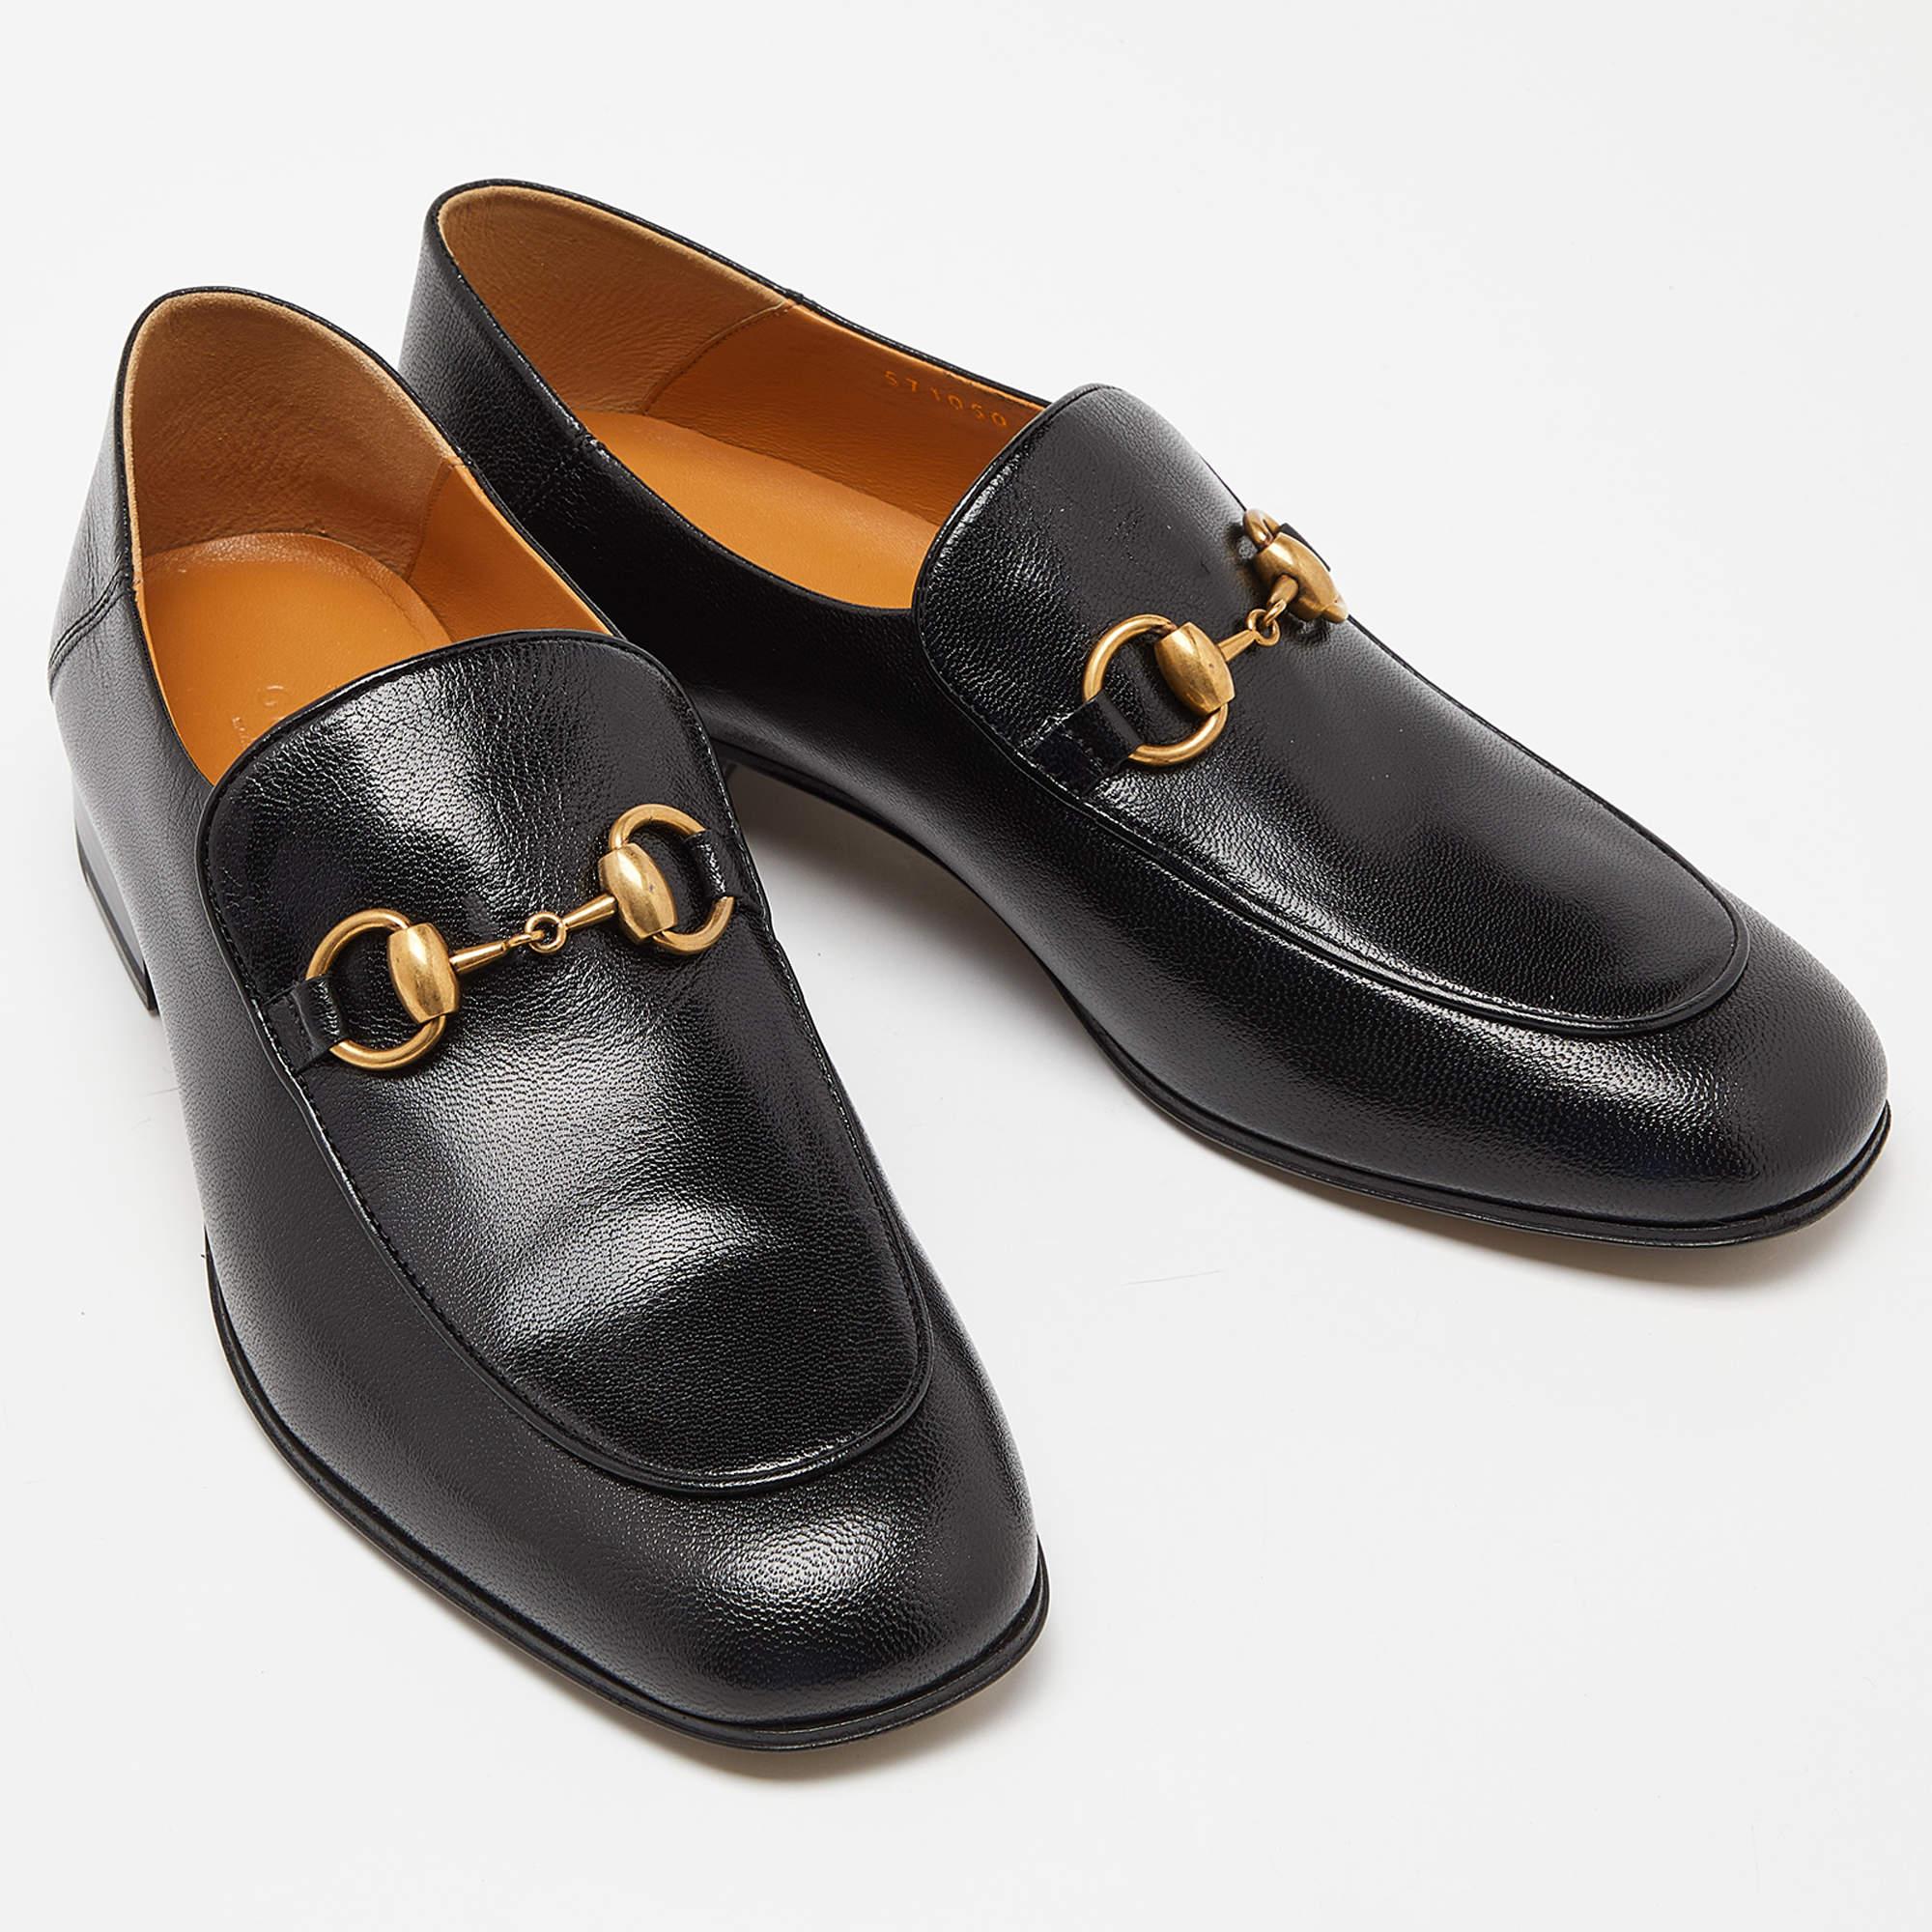 Gucci Black Leather Horsebit Loafers Size 38.5 1